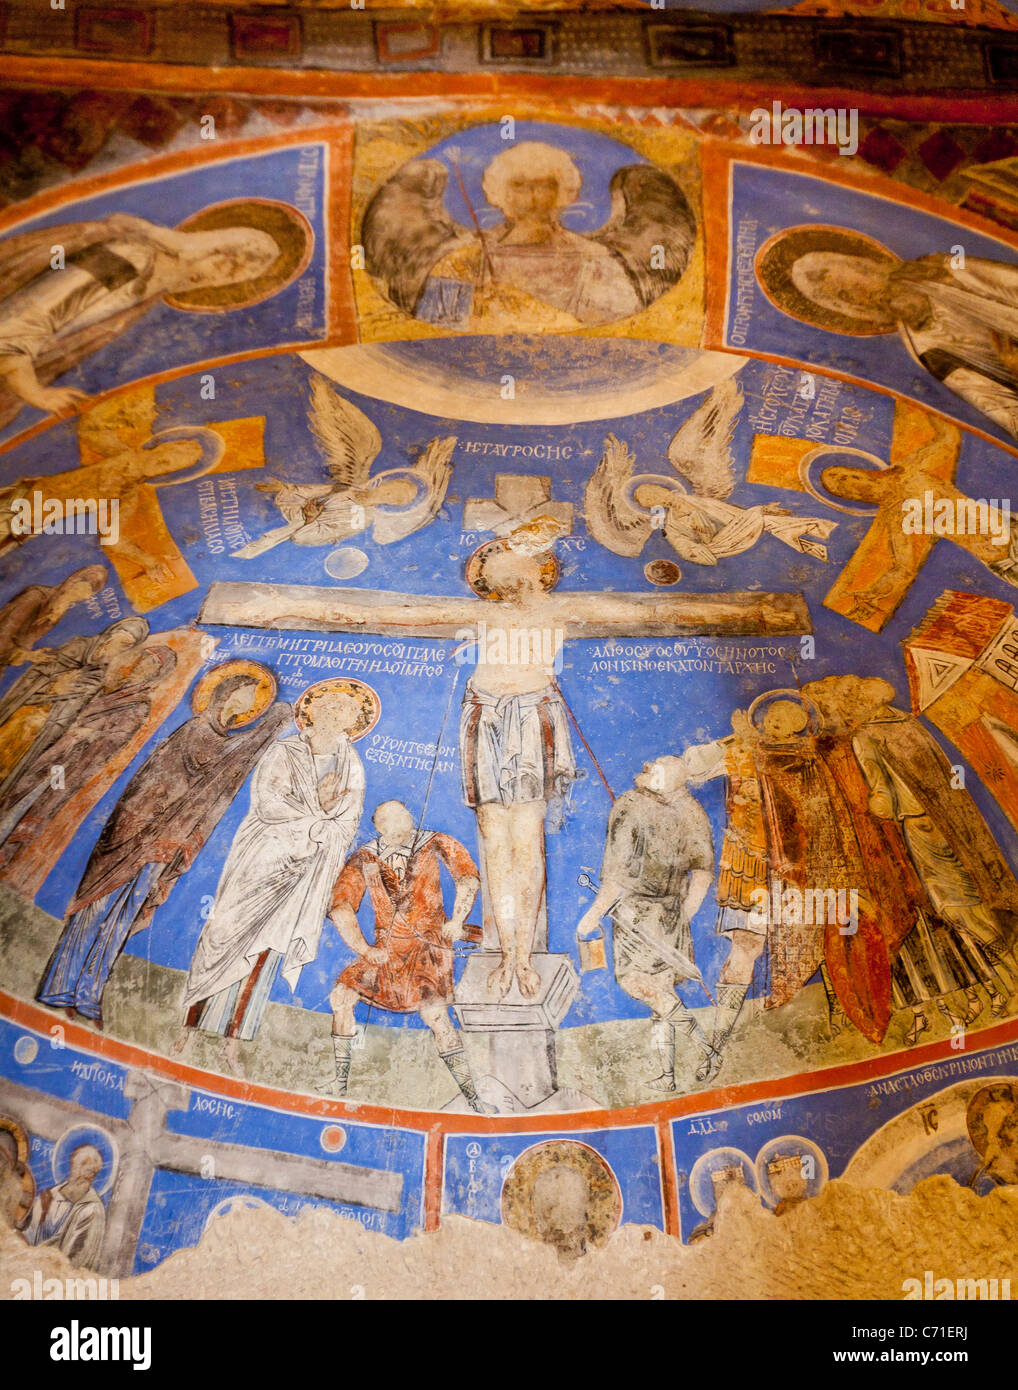 Crucified Christ on a Domed Ceiling. A damaged painting of the crucifiction of Christ on the front half dome of a Goreme church Stock Photo